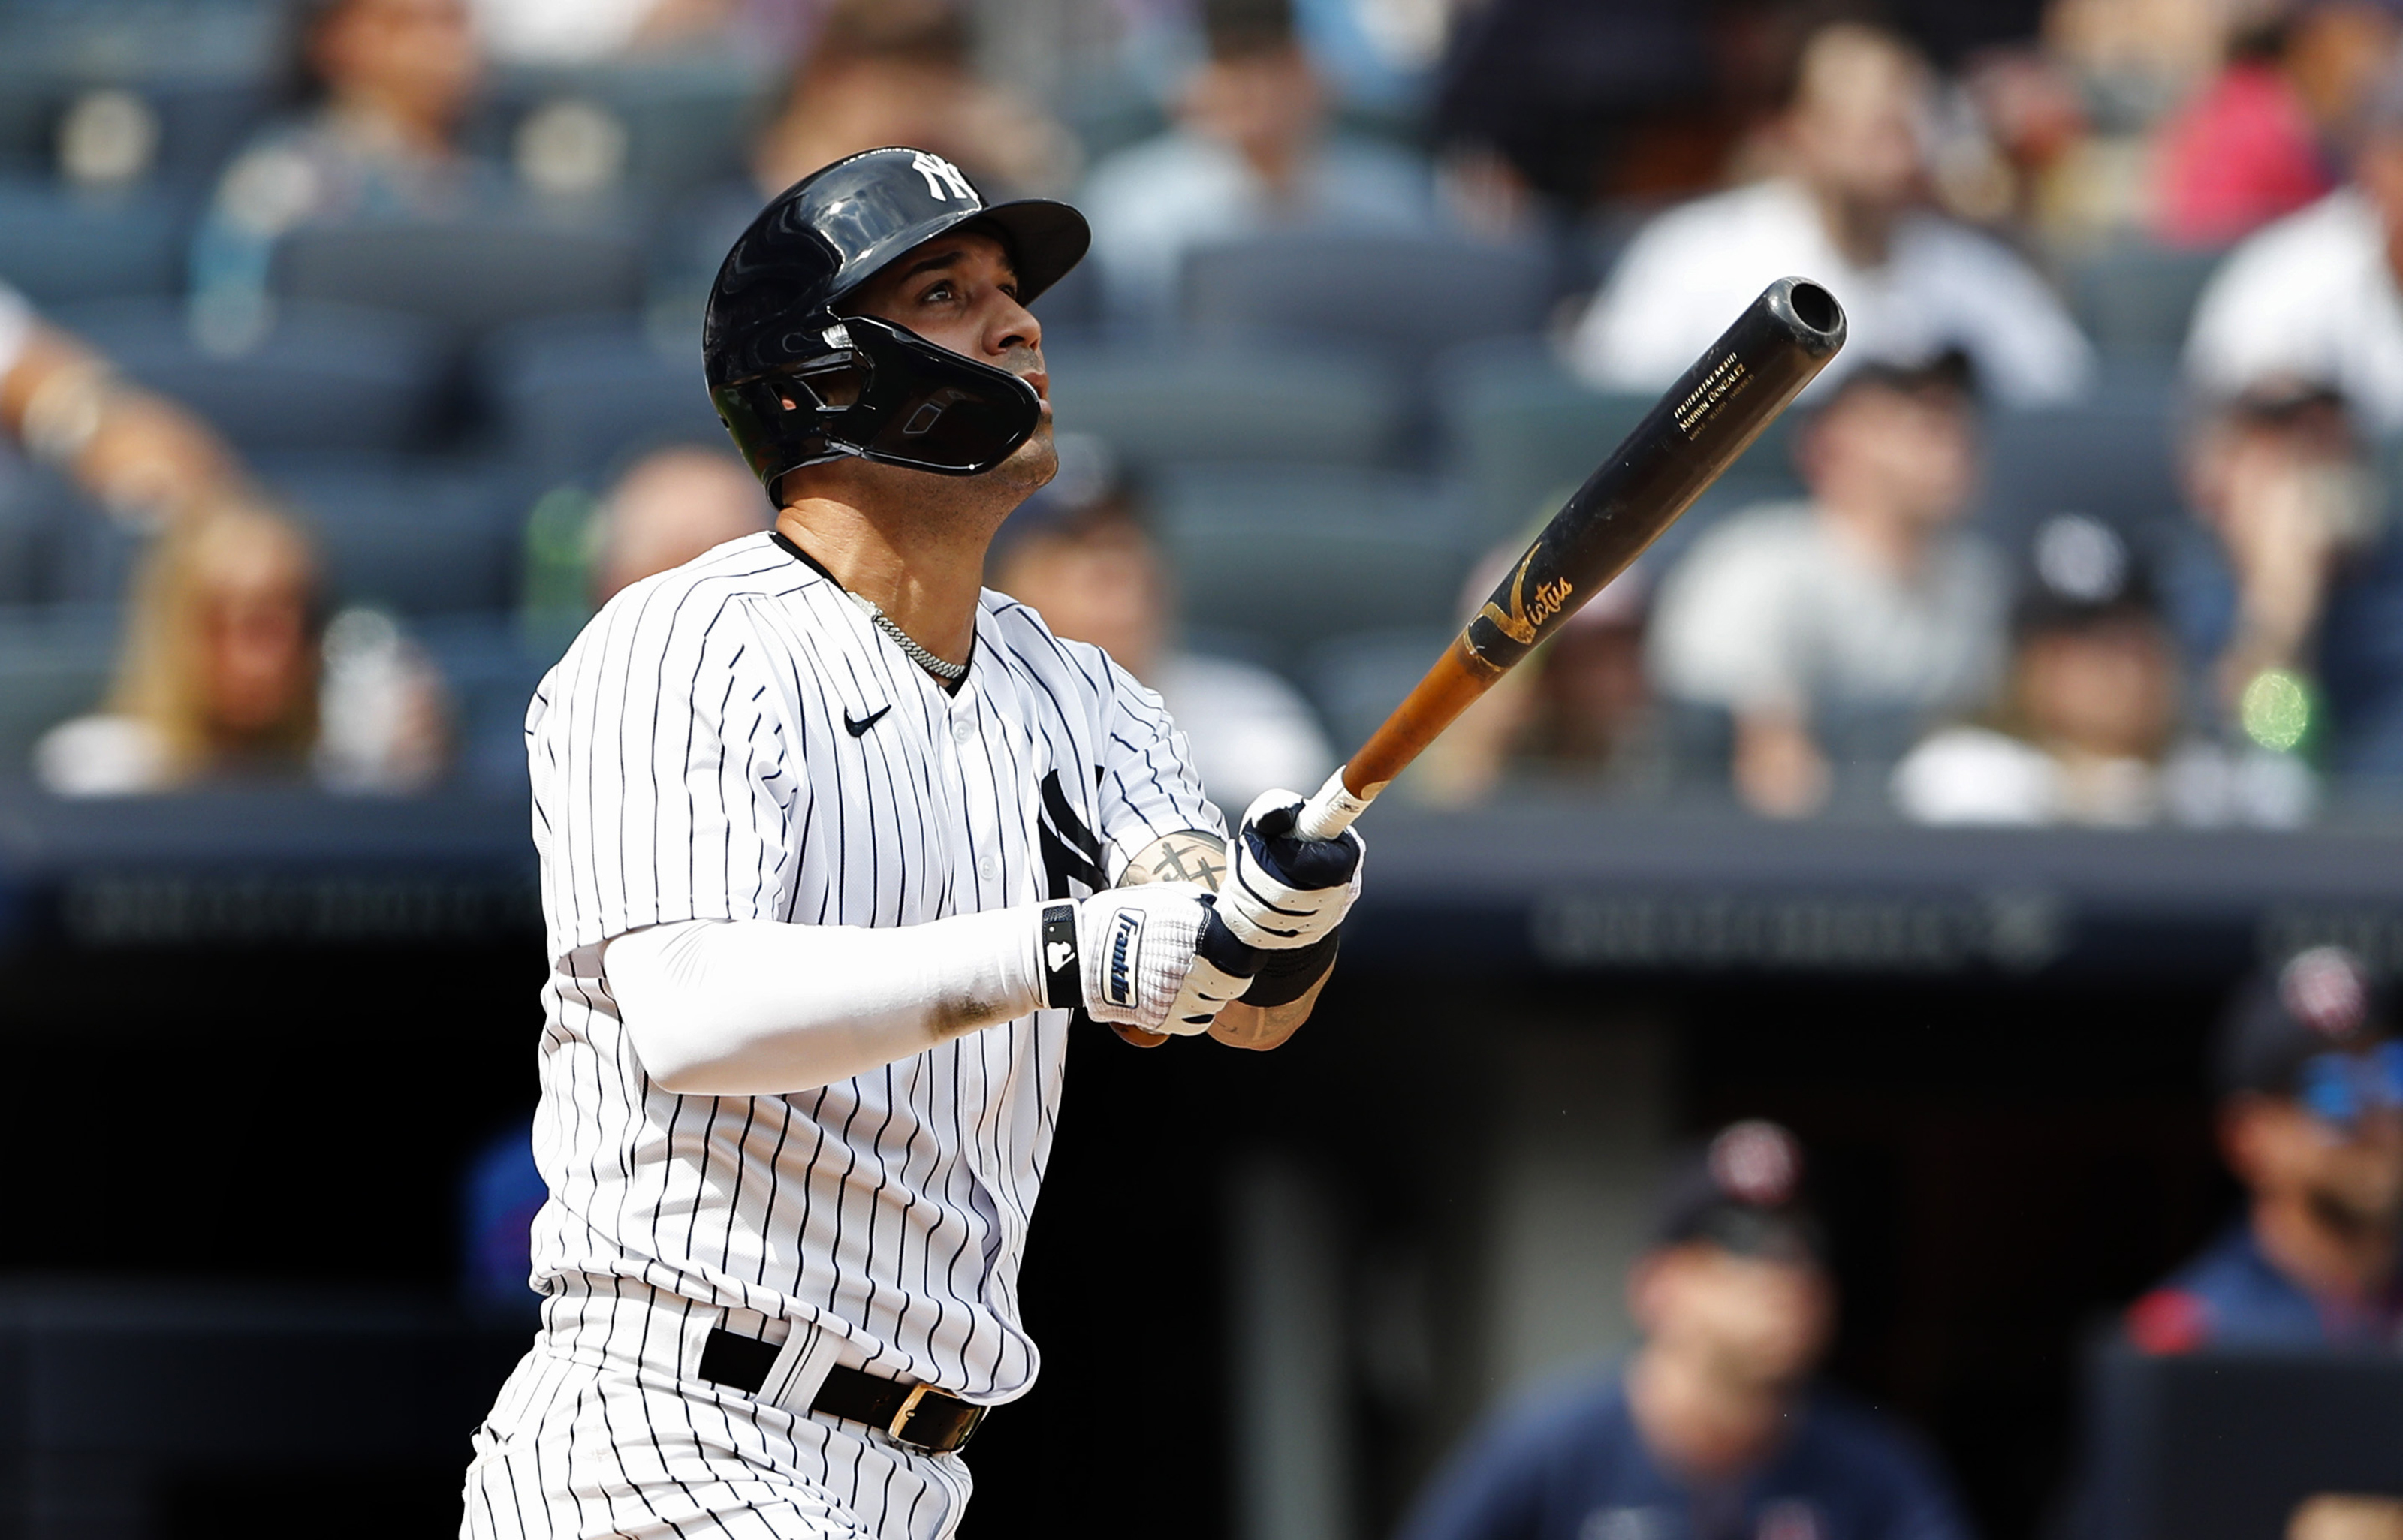 Judge connects again, hits MLB-best 54th HR, Yanks top Twins